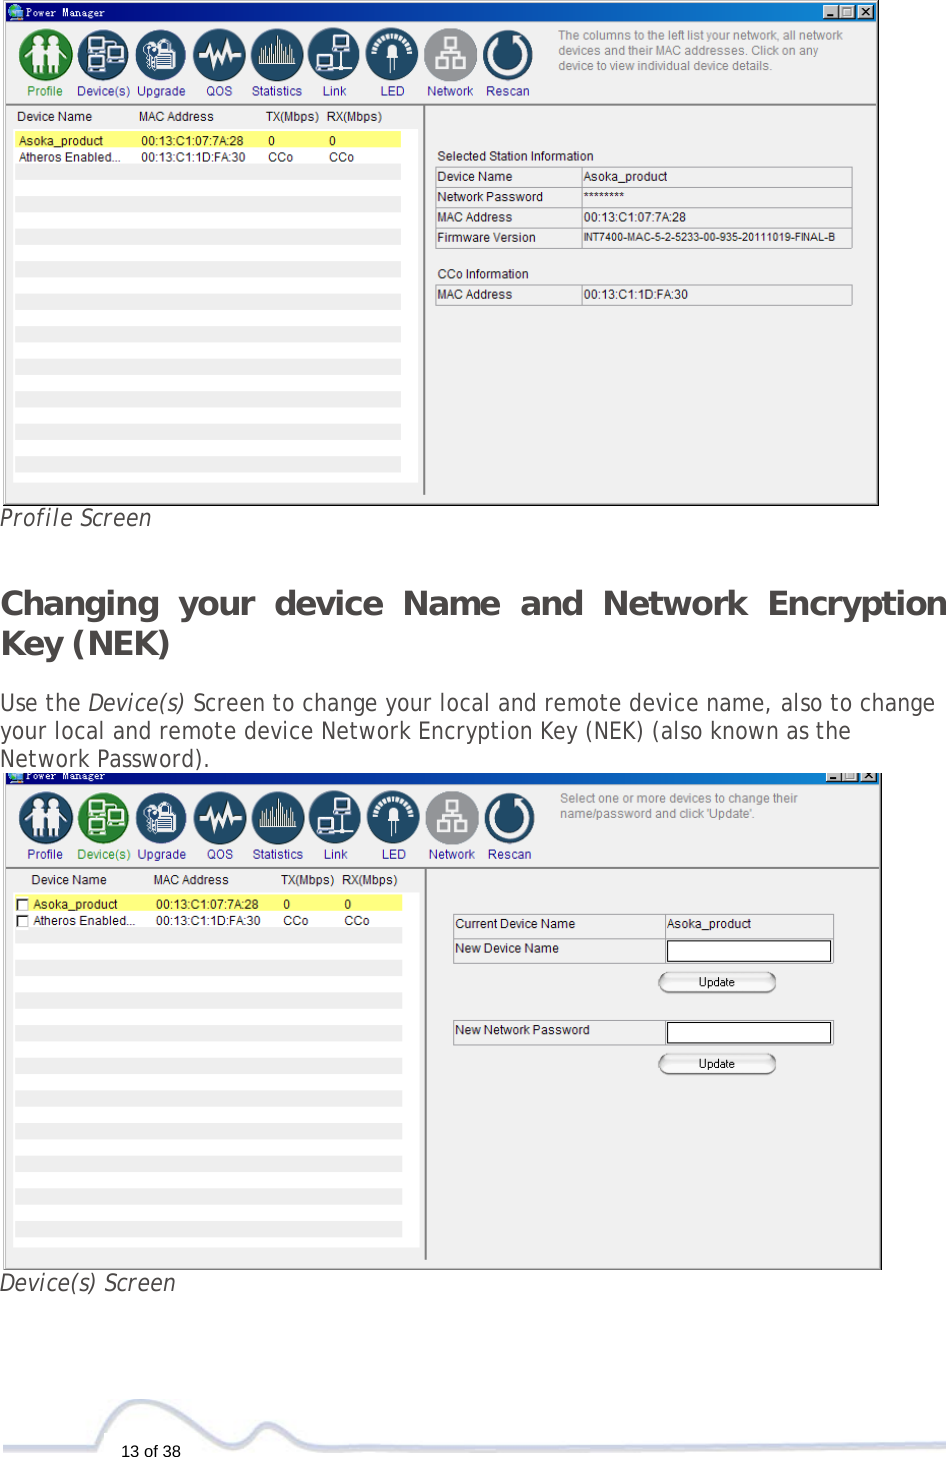  13 of 38        Profile Screen  Changing your device Name and Network Encryption Key (NEK)  Use the Device(s) Screen to change your local and remote device name, also to change your local and remote device Network Encryption Key (NEK) (also known as the Network Password).  Device(s) Screen 